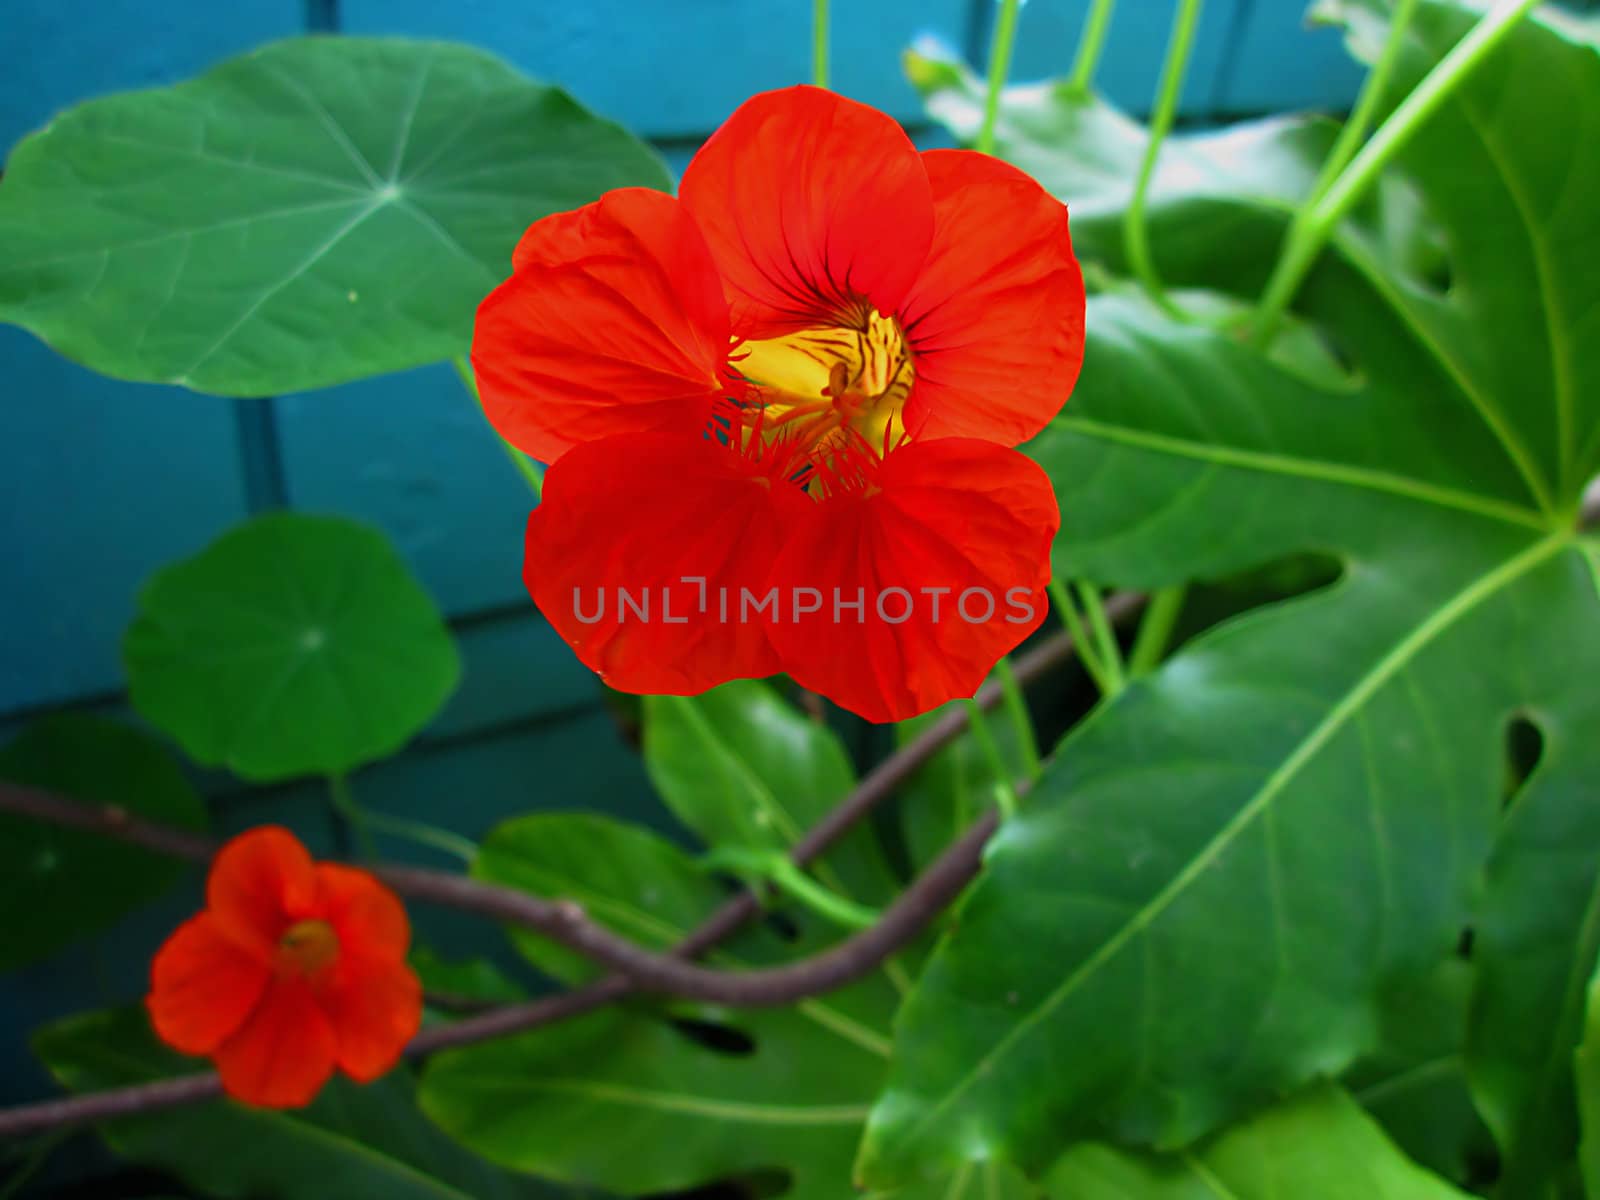 Nasturtium (Latin Name: Tropaeolum majus) is an annual flowering plant that is native to northern South America.